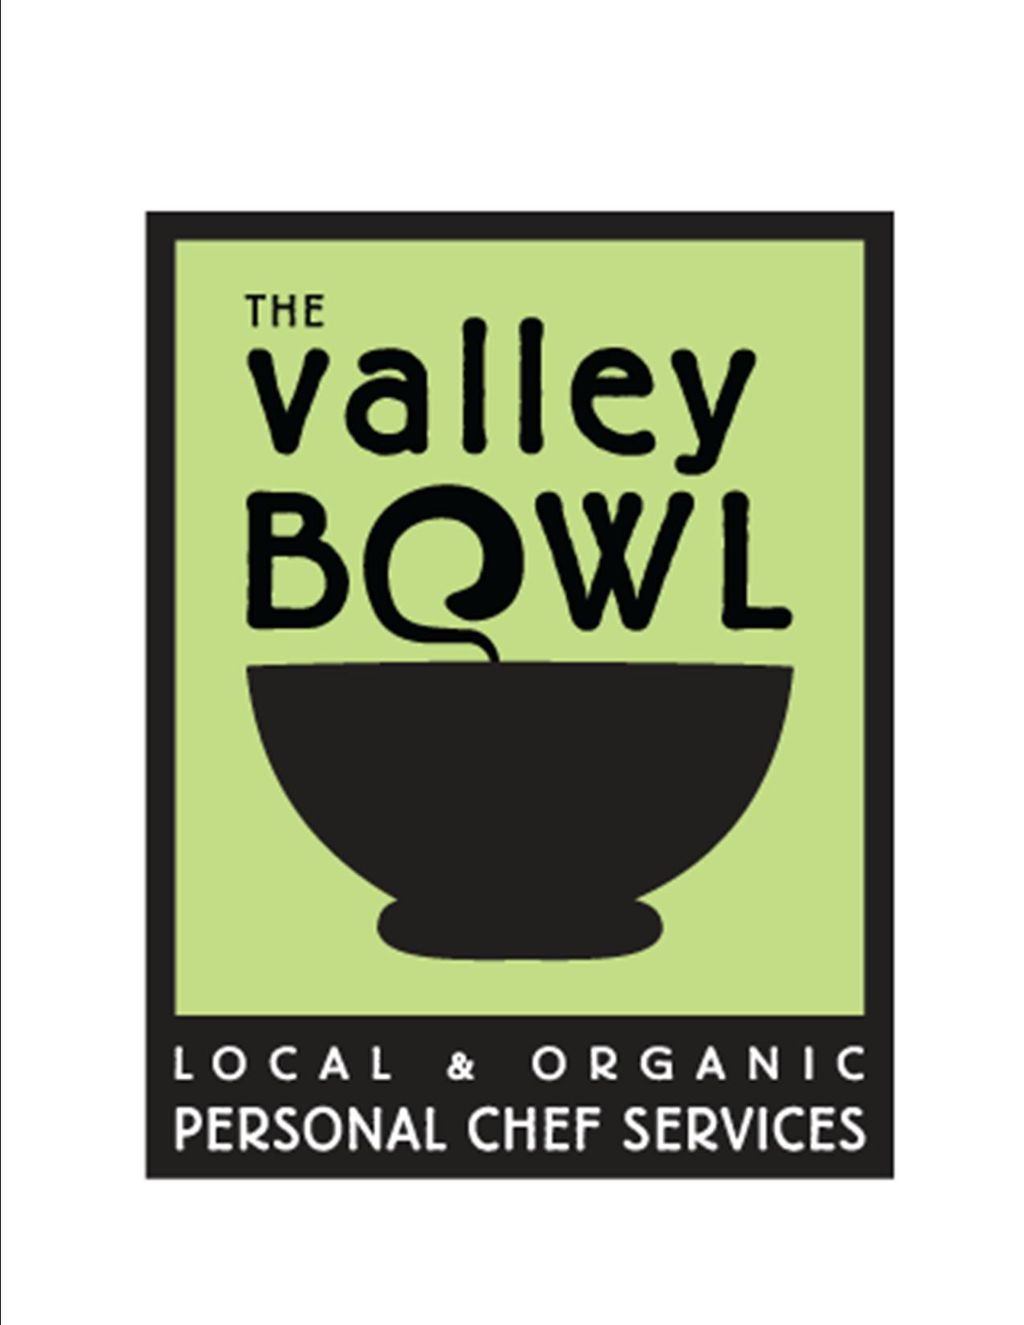 The Valley Bowl